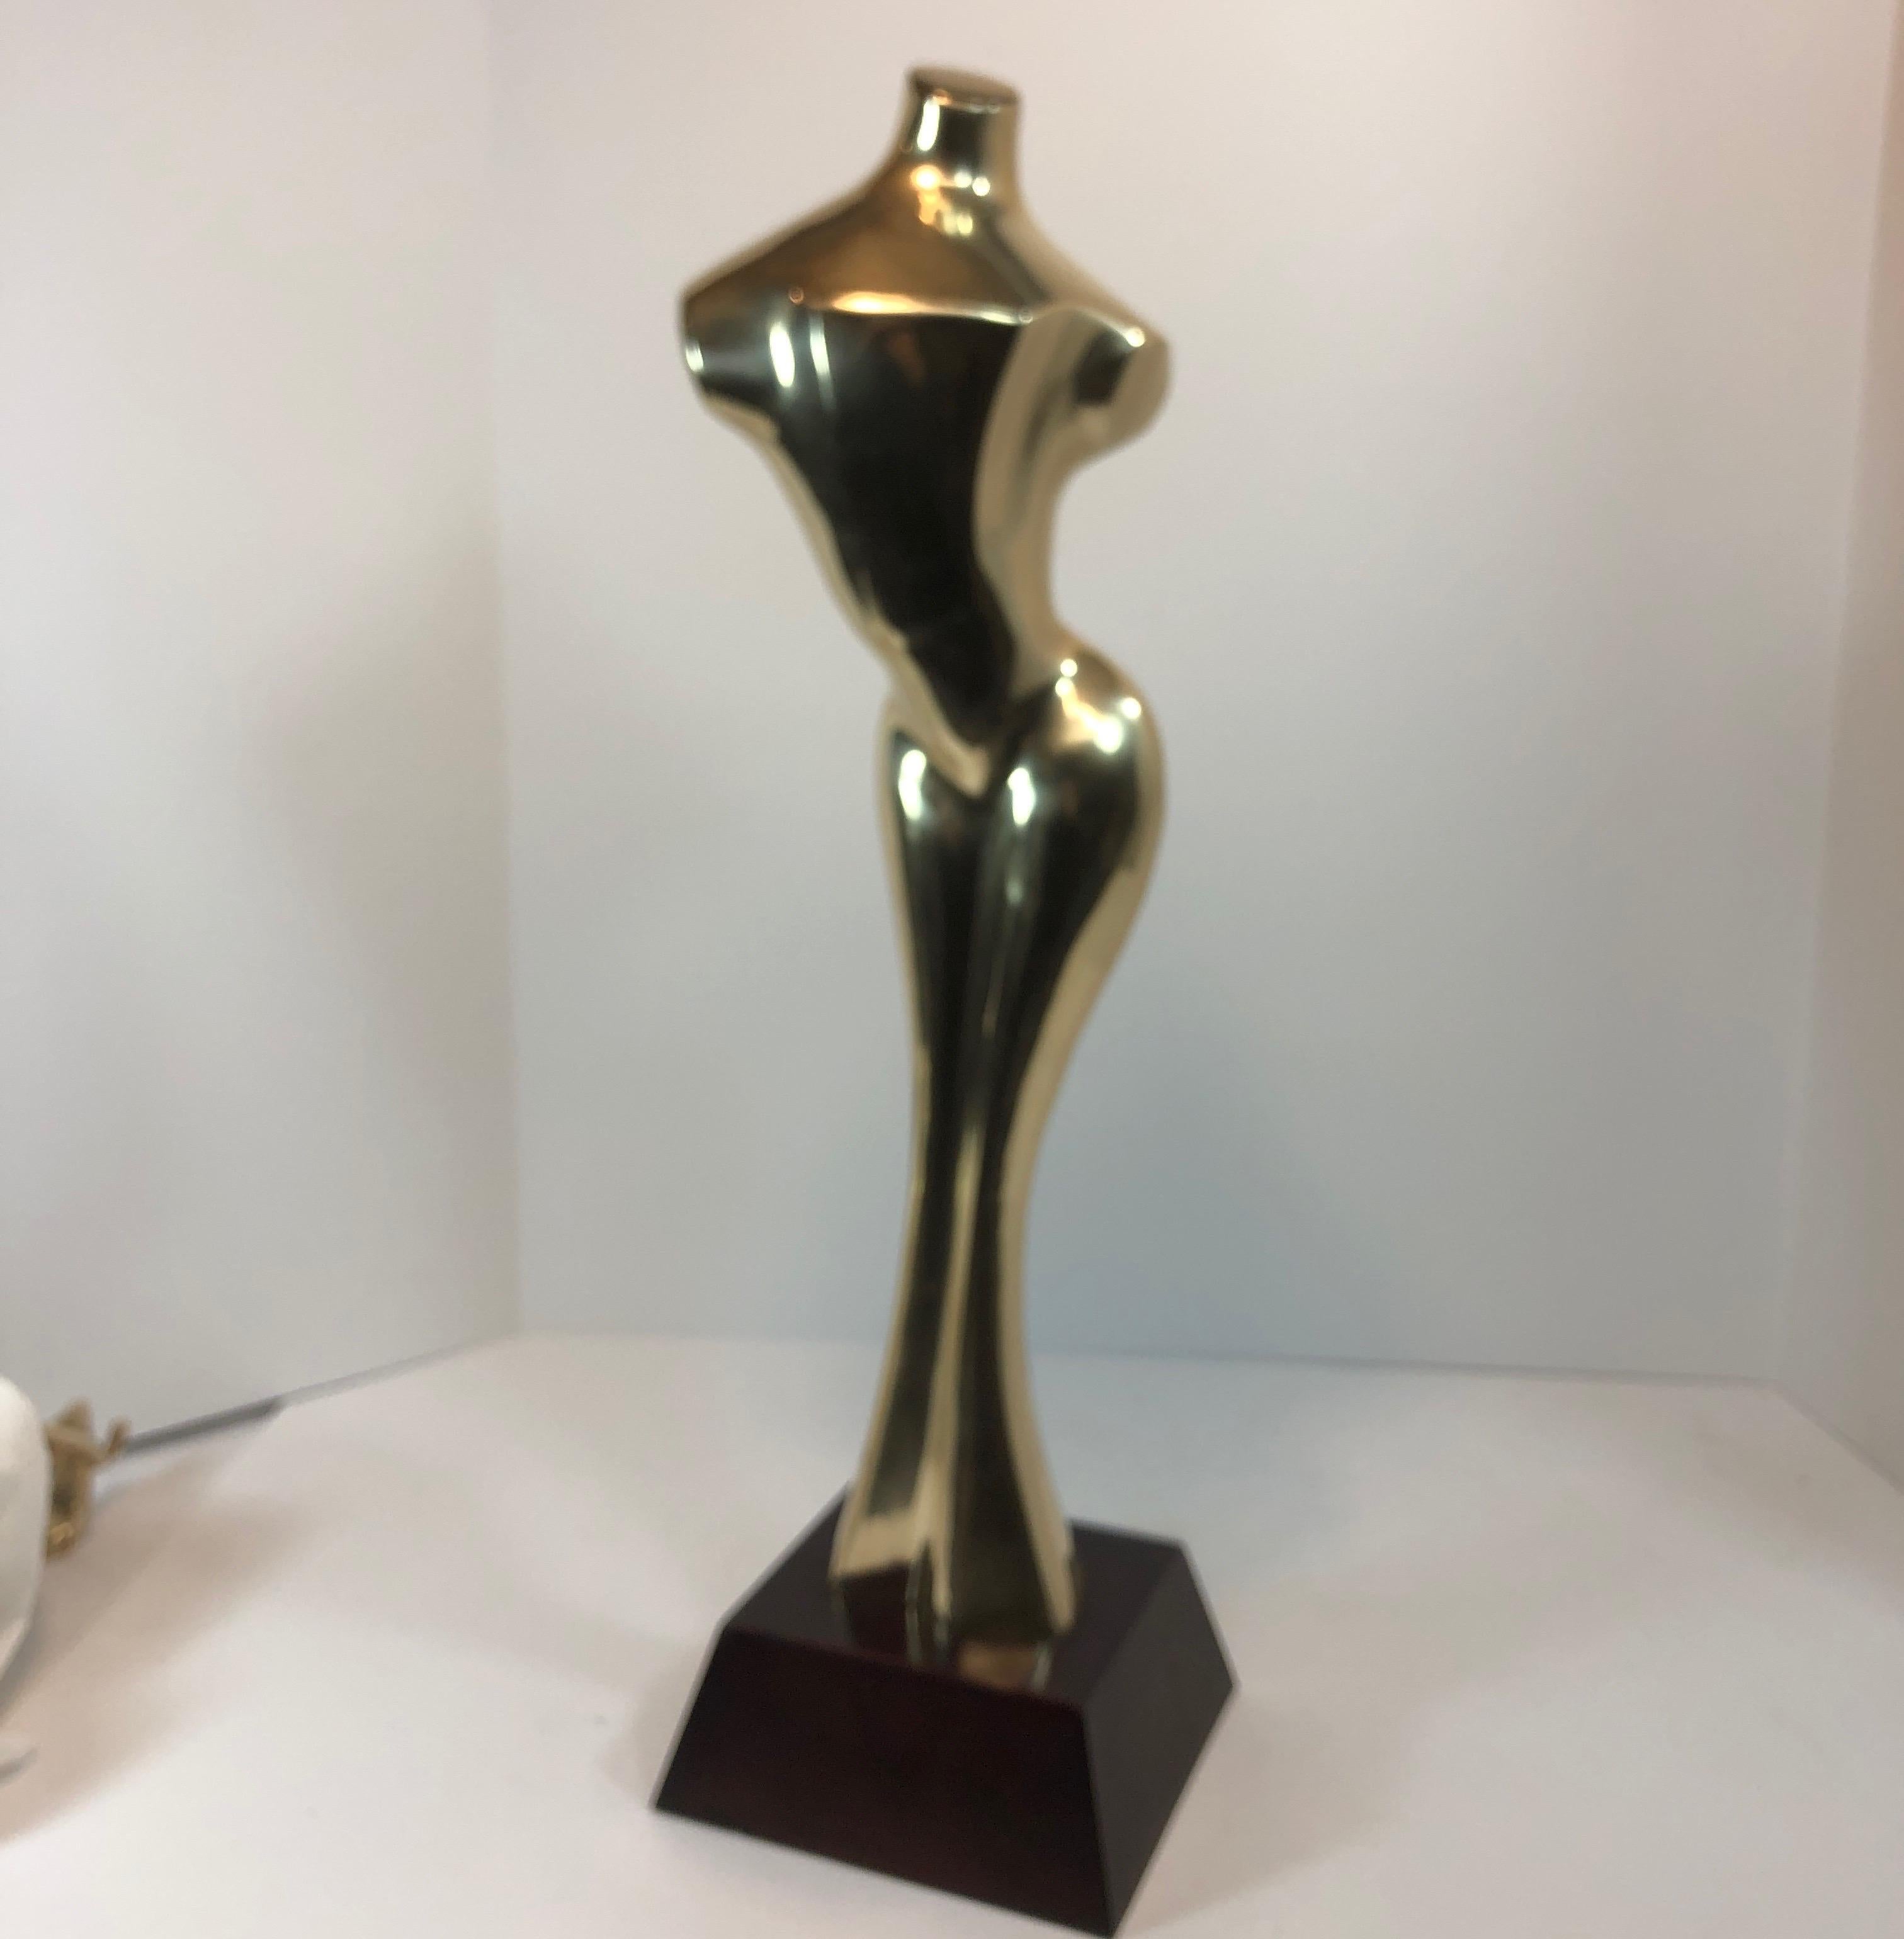 Tall nude curvy female brass sculpture on wood stand. Has great shape. Hand polished, could be machined polished for an amazing finish. Made in Italy by Decorative Crafts Inc. Label on underside.